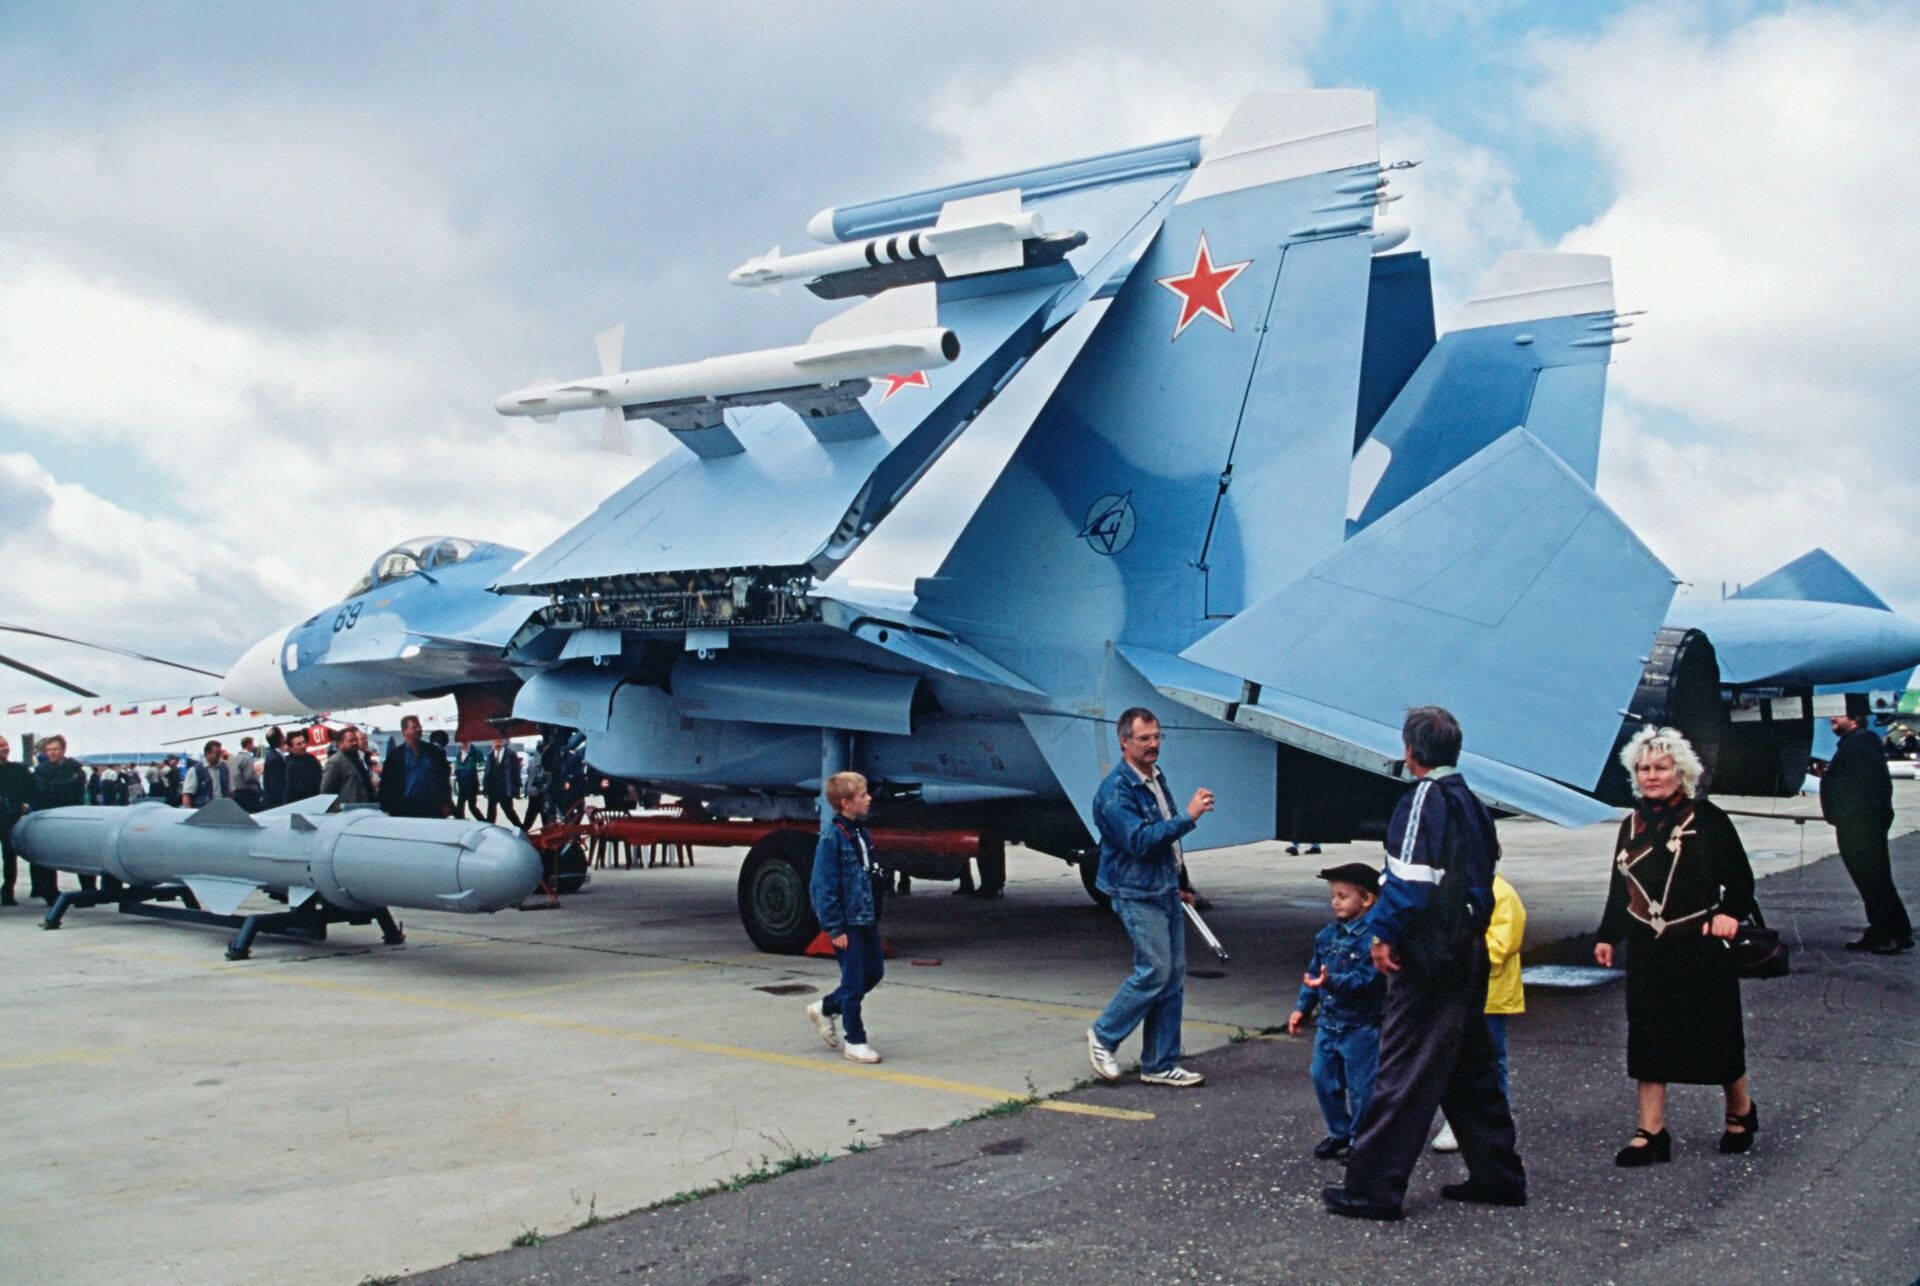 This Sukhoi Su-33 Flanker warplane was displayed at the fourth MAKS-1999 aerospace show in the town of Zhukovsky outside Moscow. (File) - Sputnik International, 1920, 19.12.2022